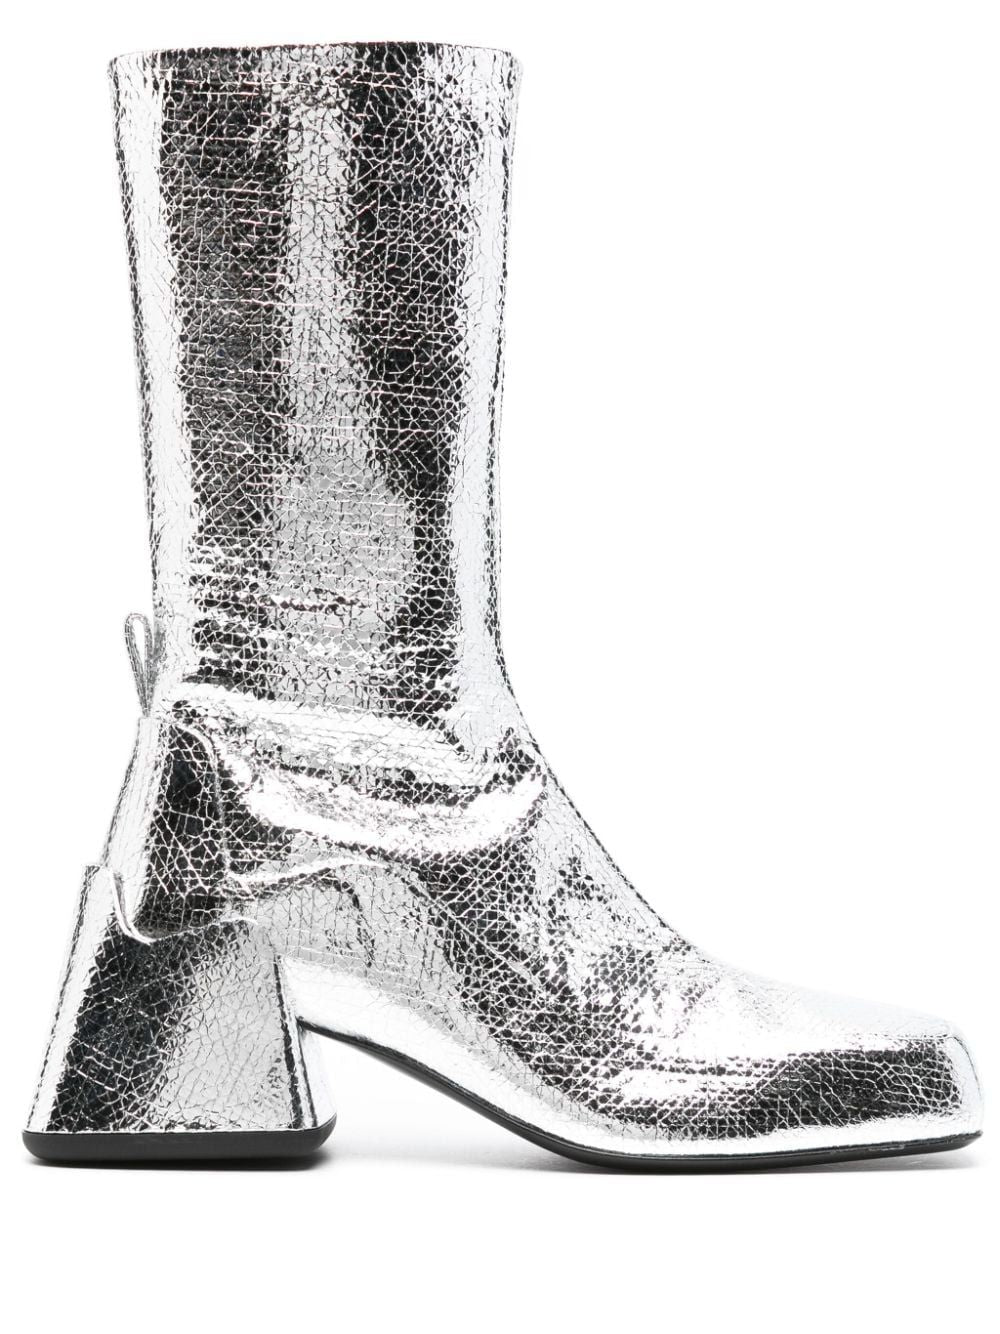 JIL SANDER Cracked-Effect Laminated Leather Boots for Women in Silver for FW23